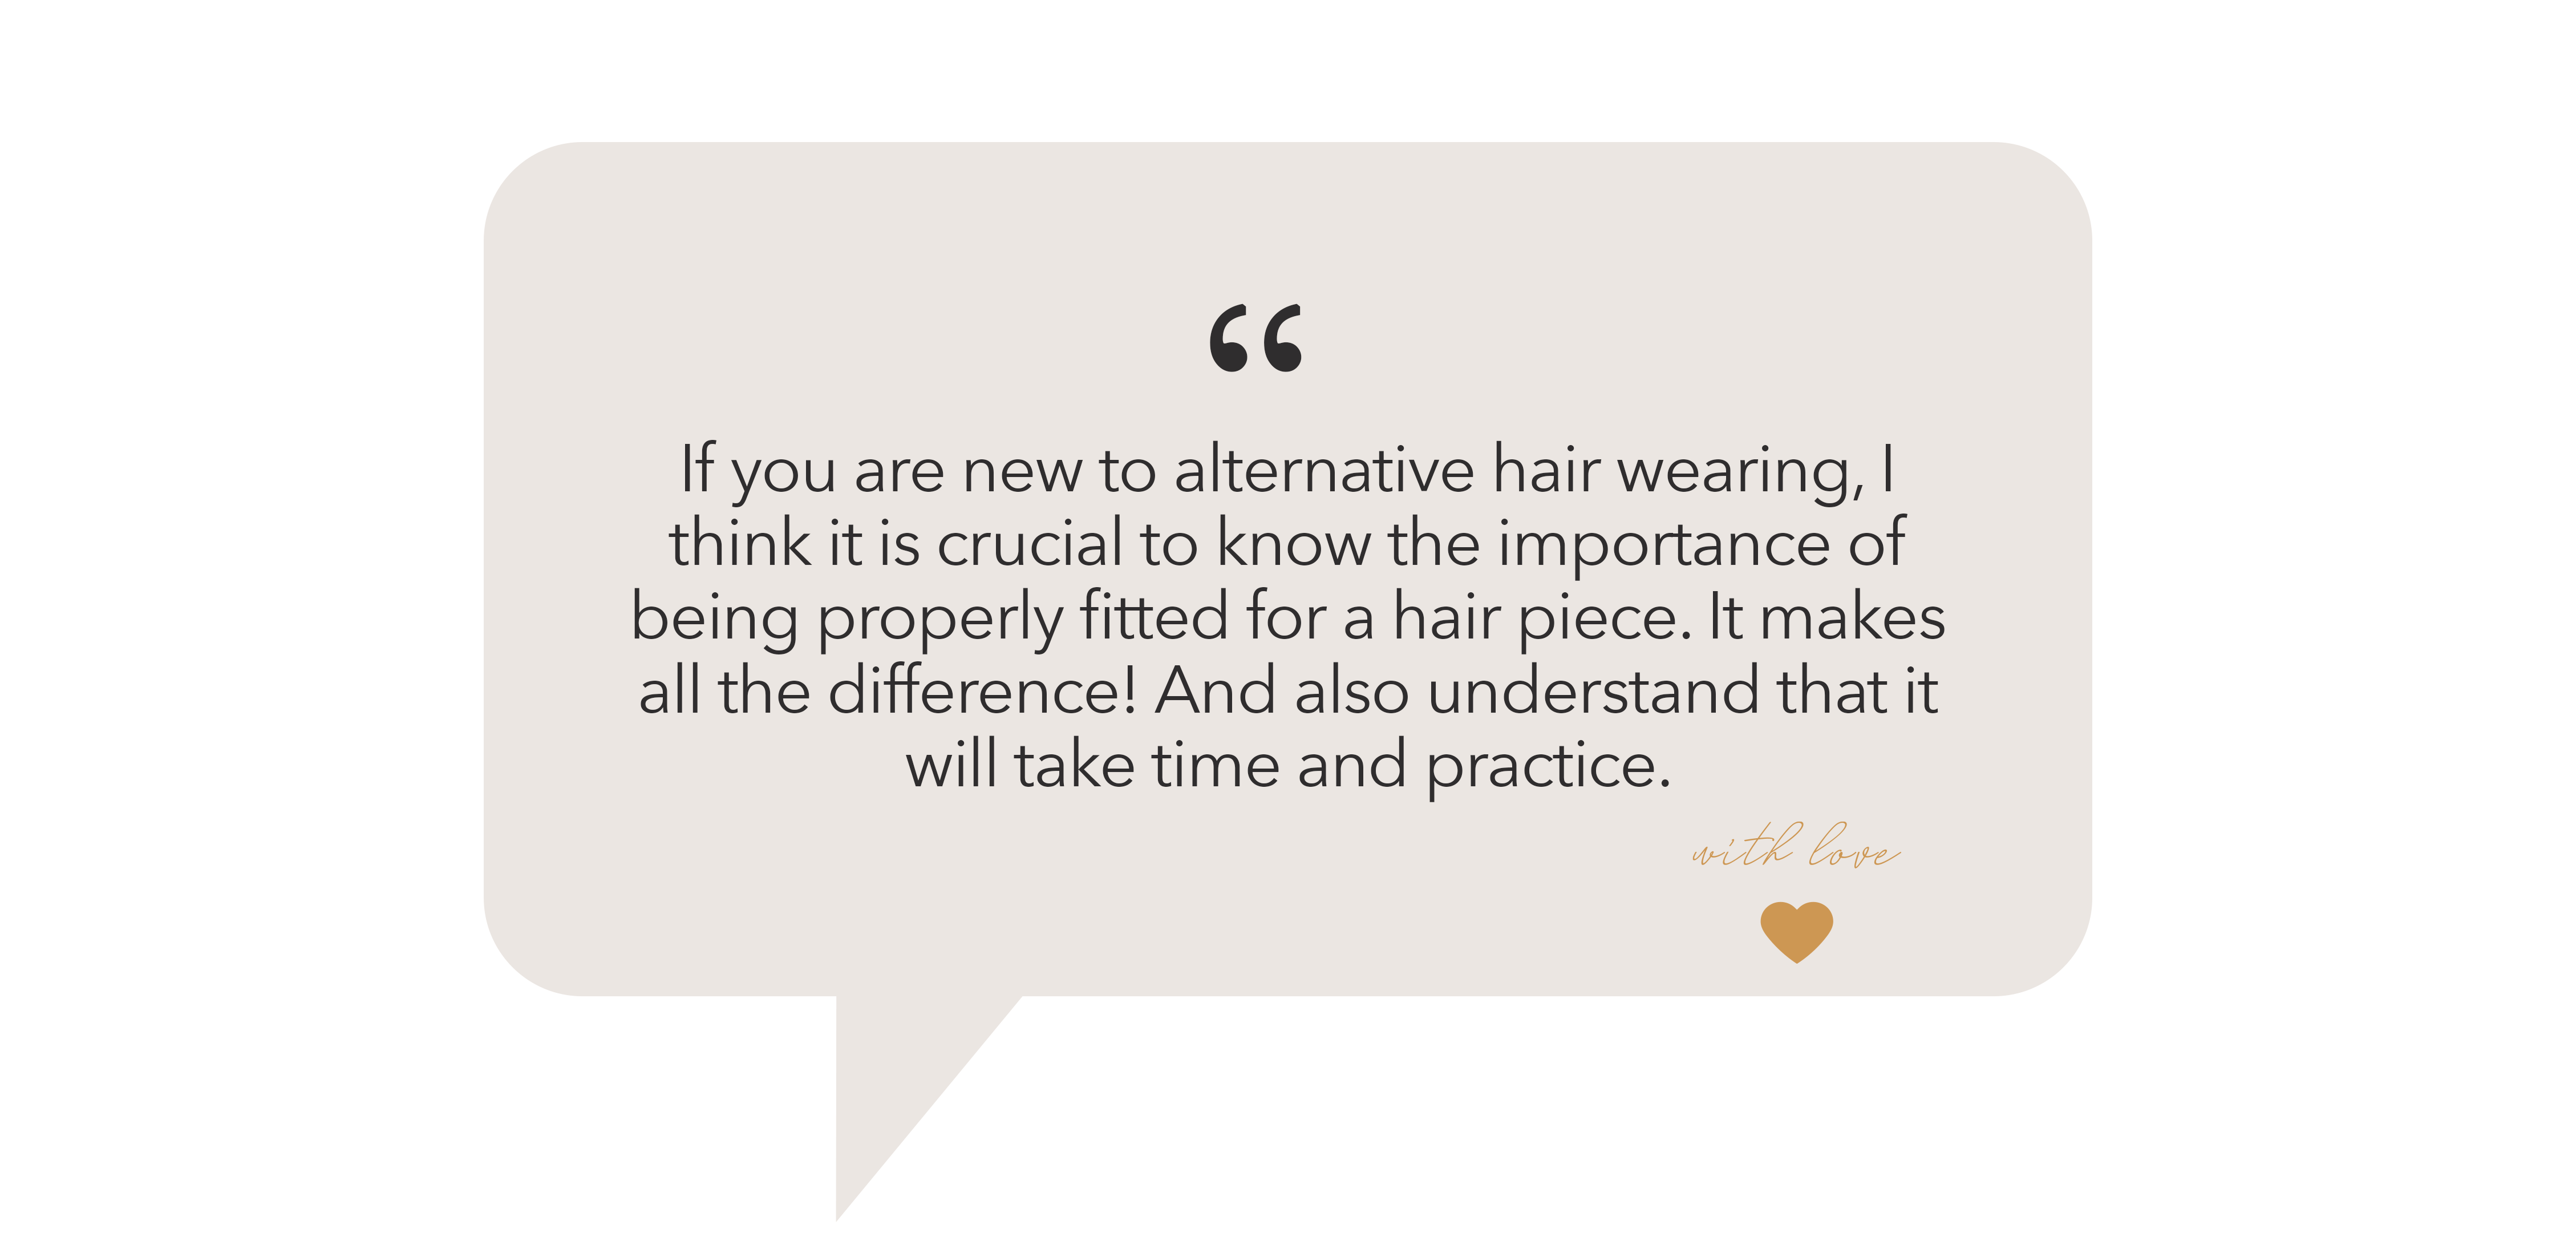 "If you are new to alternative hair wearing, I think it is crucial to know the importance of being properly fitted for a hair piece. It makes all the difference! And also understand that it will take time and practice. "